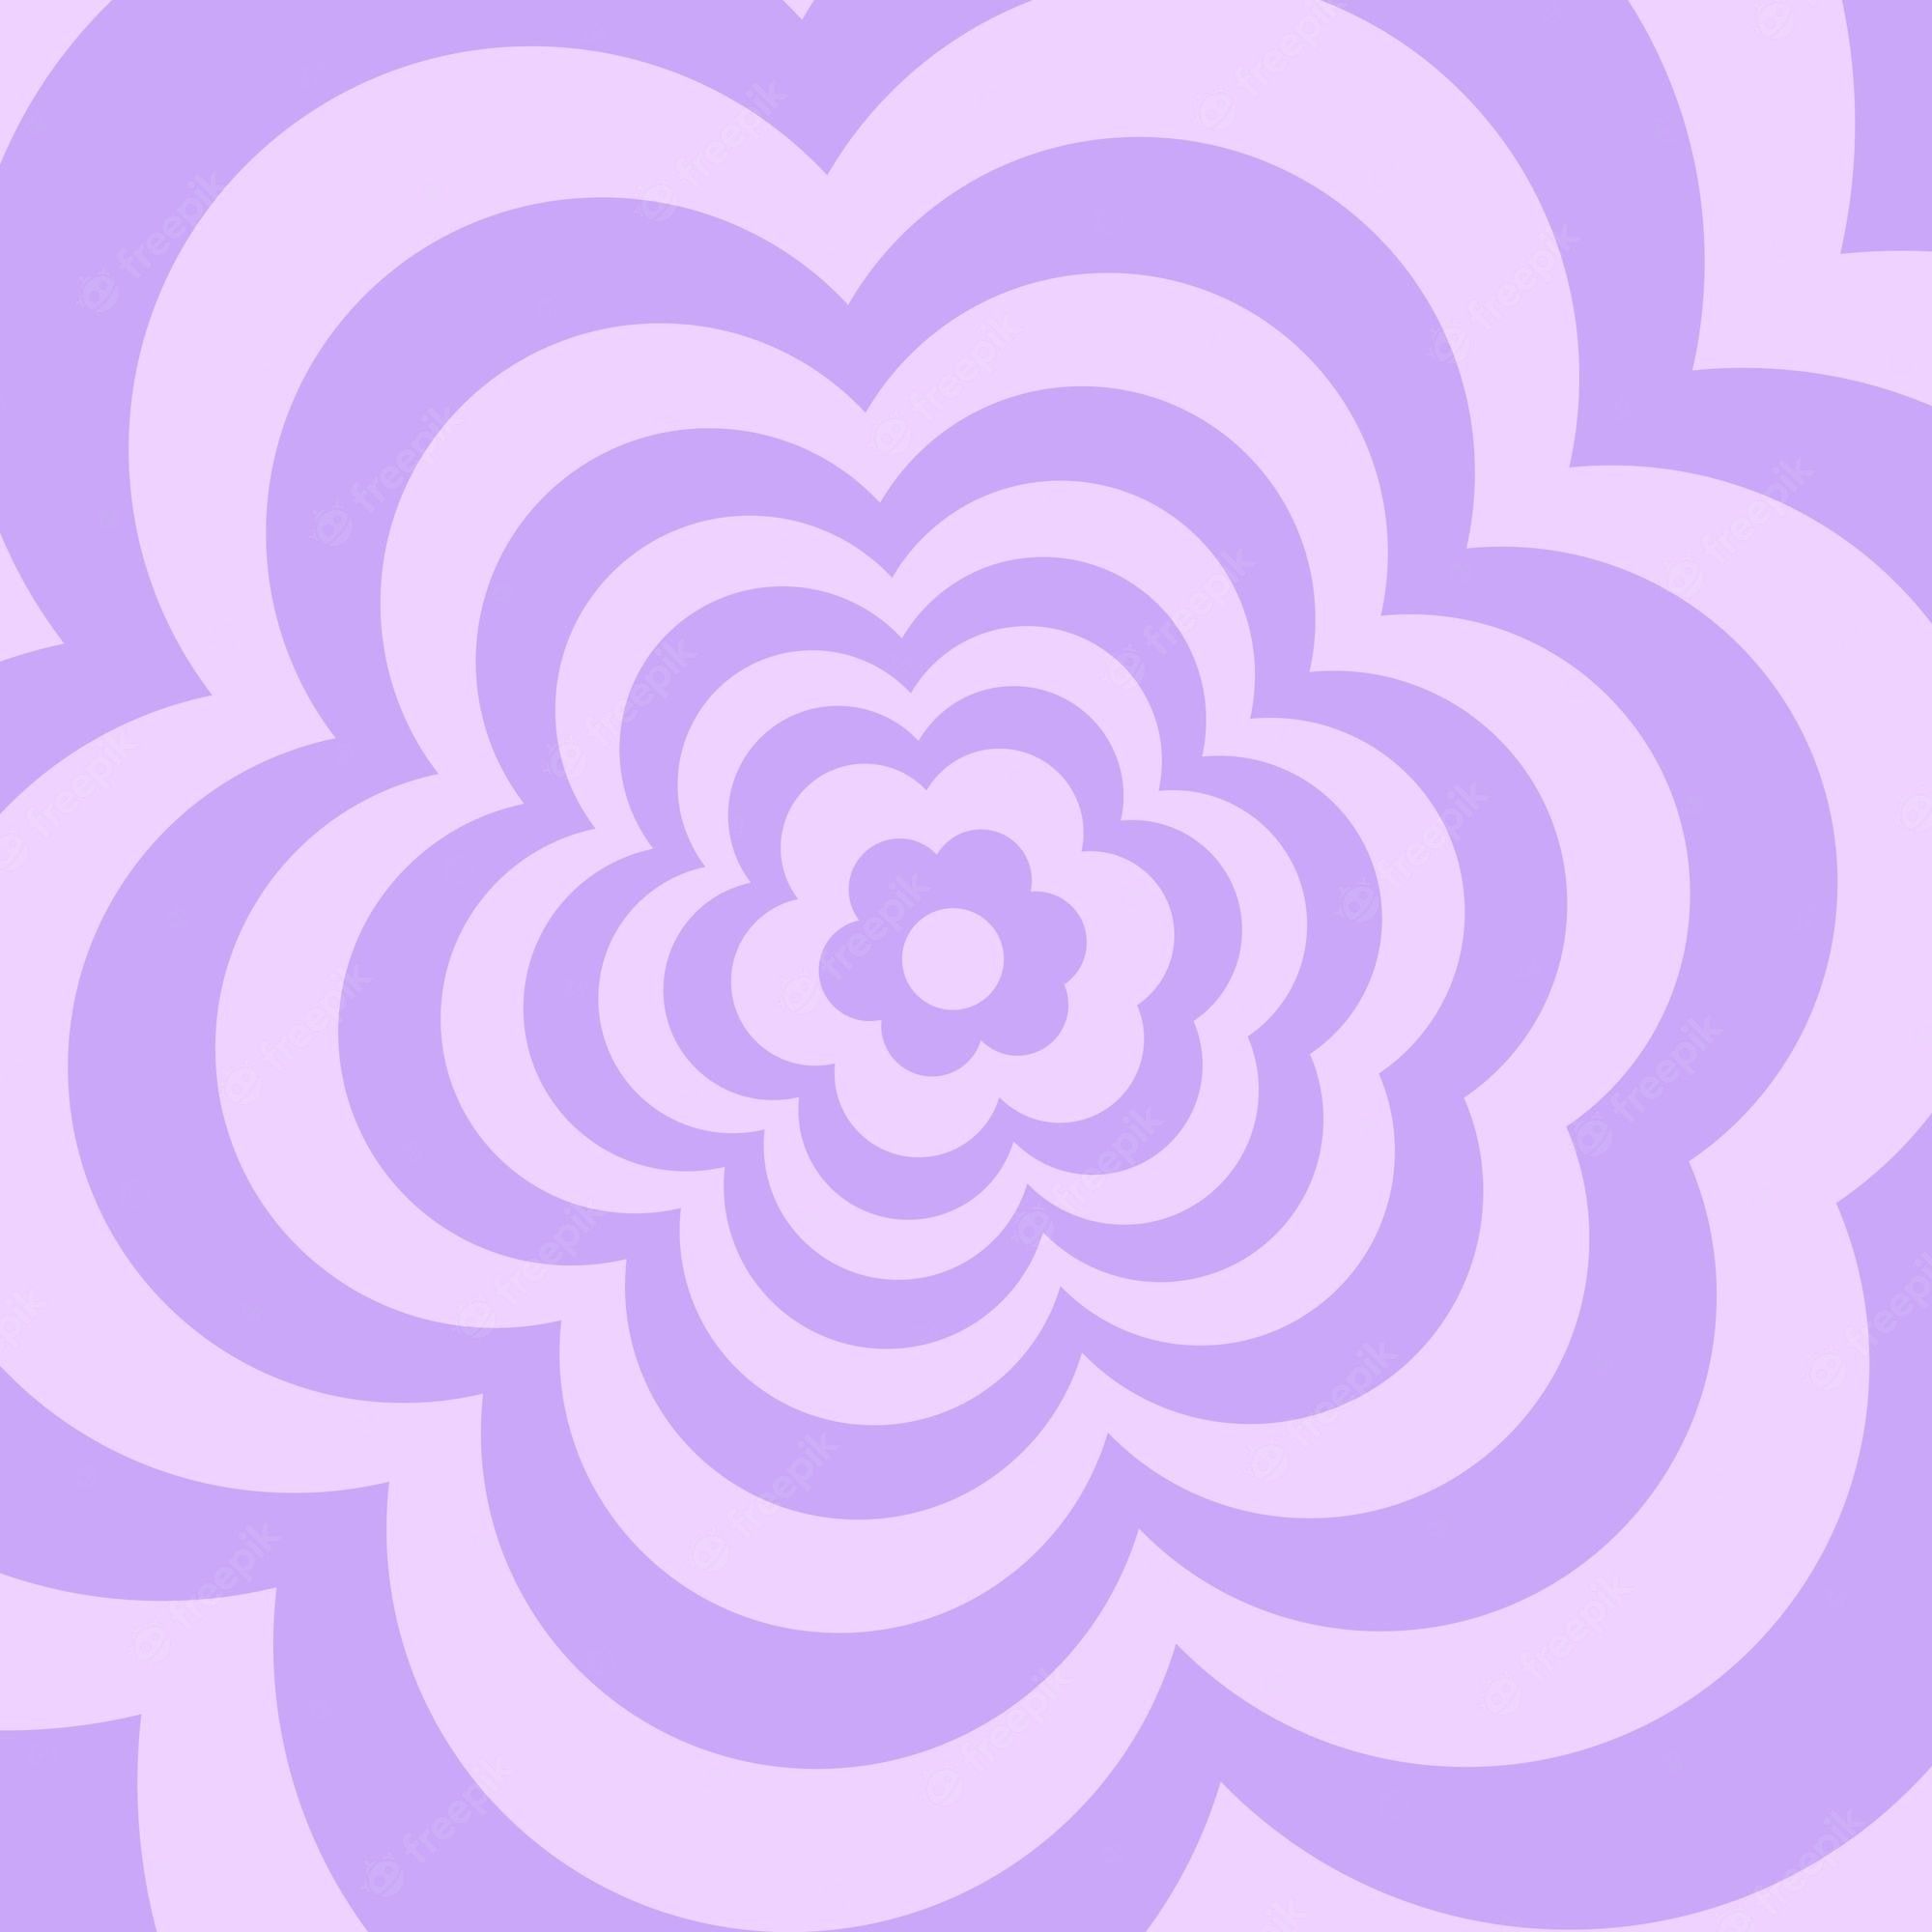 A stylized image of a flower with many layers - Pastel purple